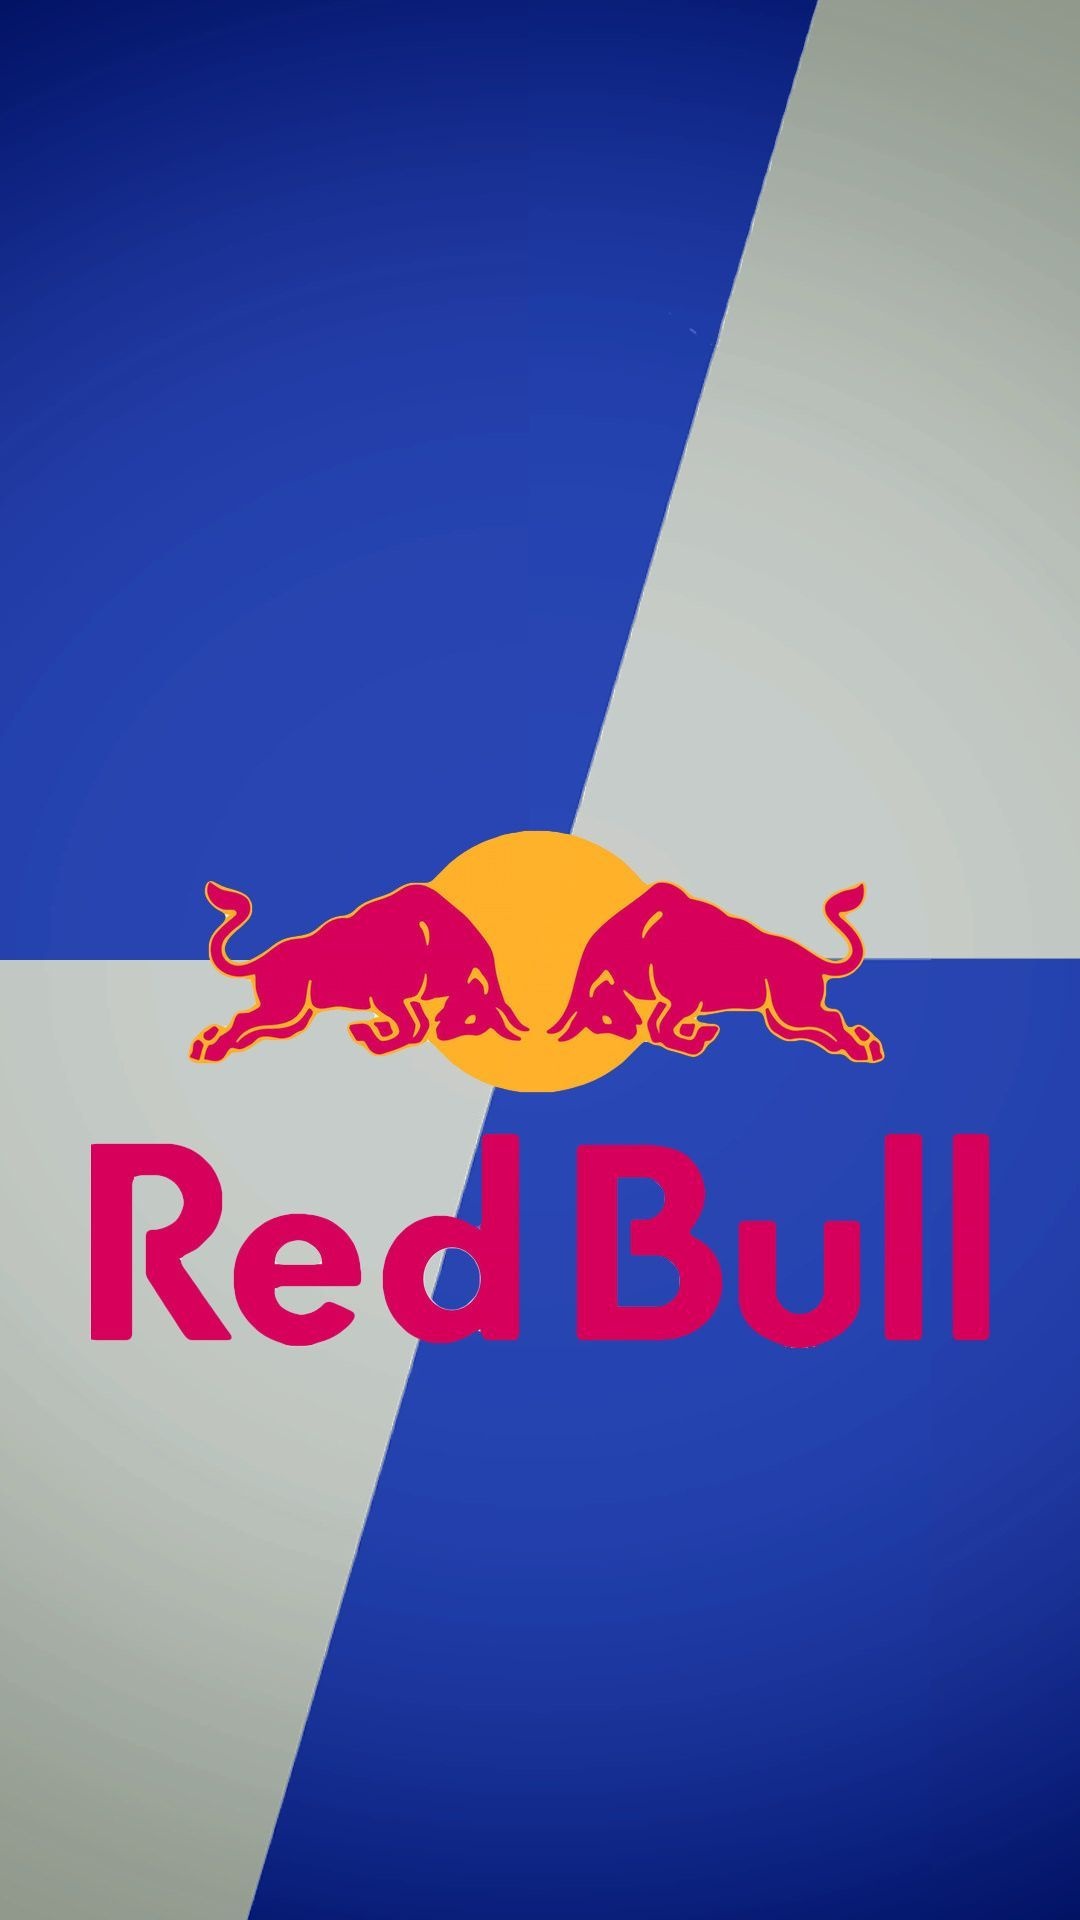 Red Bull Logo: A carbonated taurine drink, Improving information processing in individuals. 1080x1920 Full HD Background.